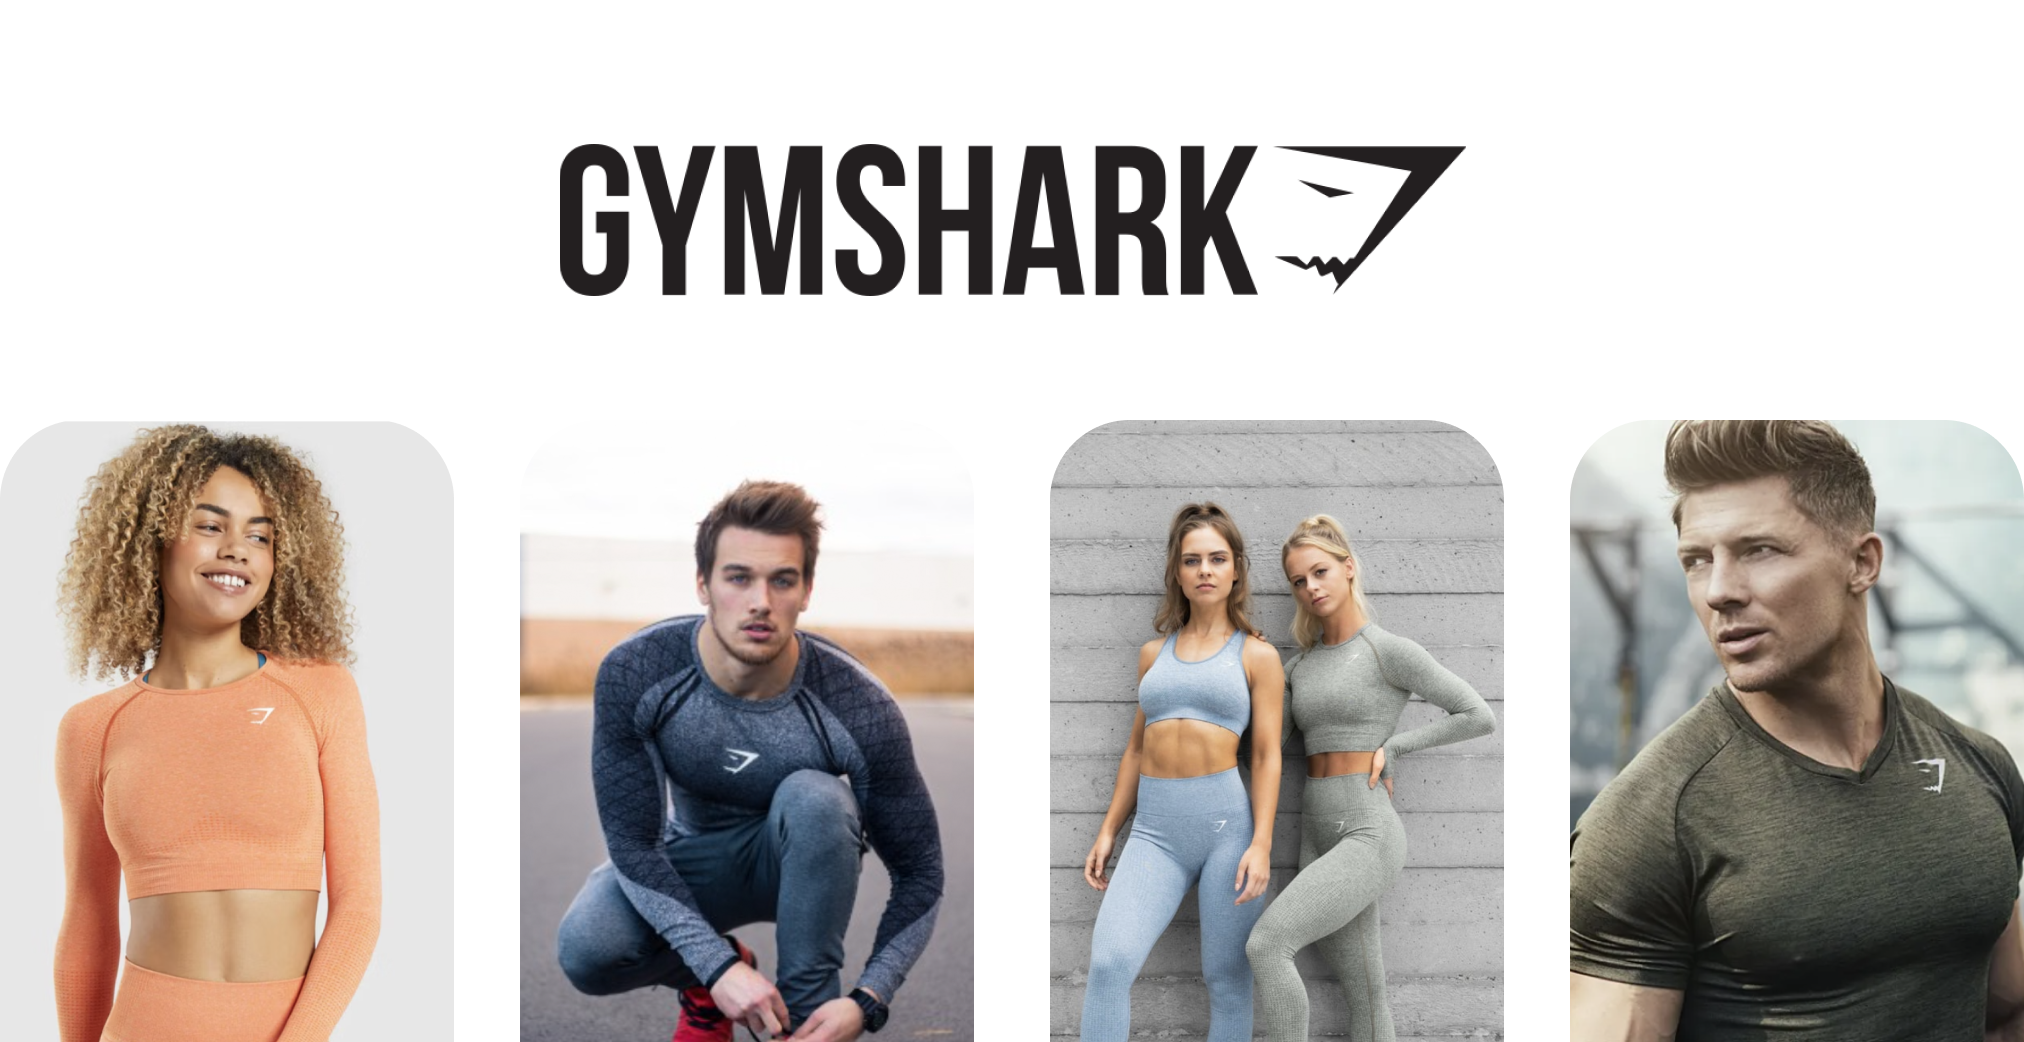 How much does GymShark pay influencers?